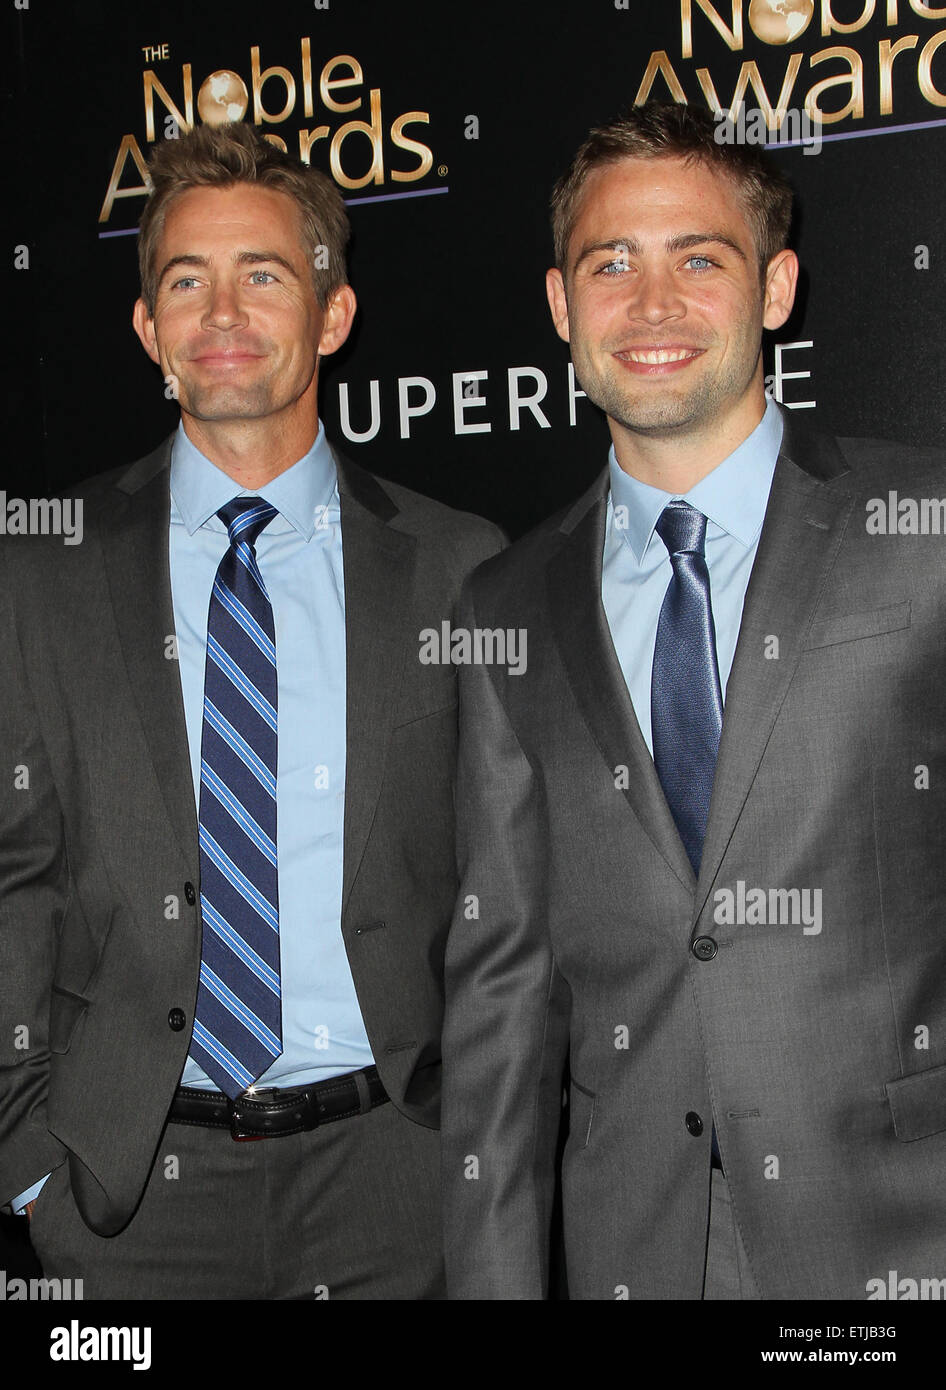 Cody Walker And Caleb Walker High Resolution Stock Photography and Images -  Alamy